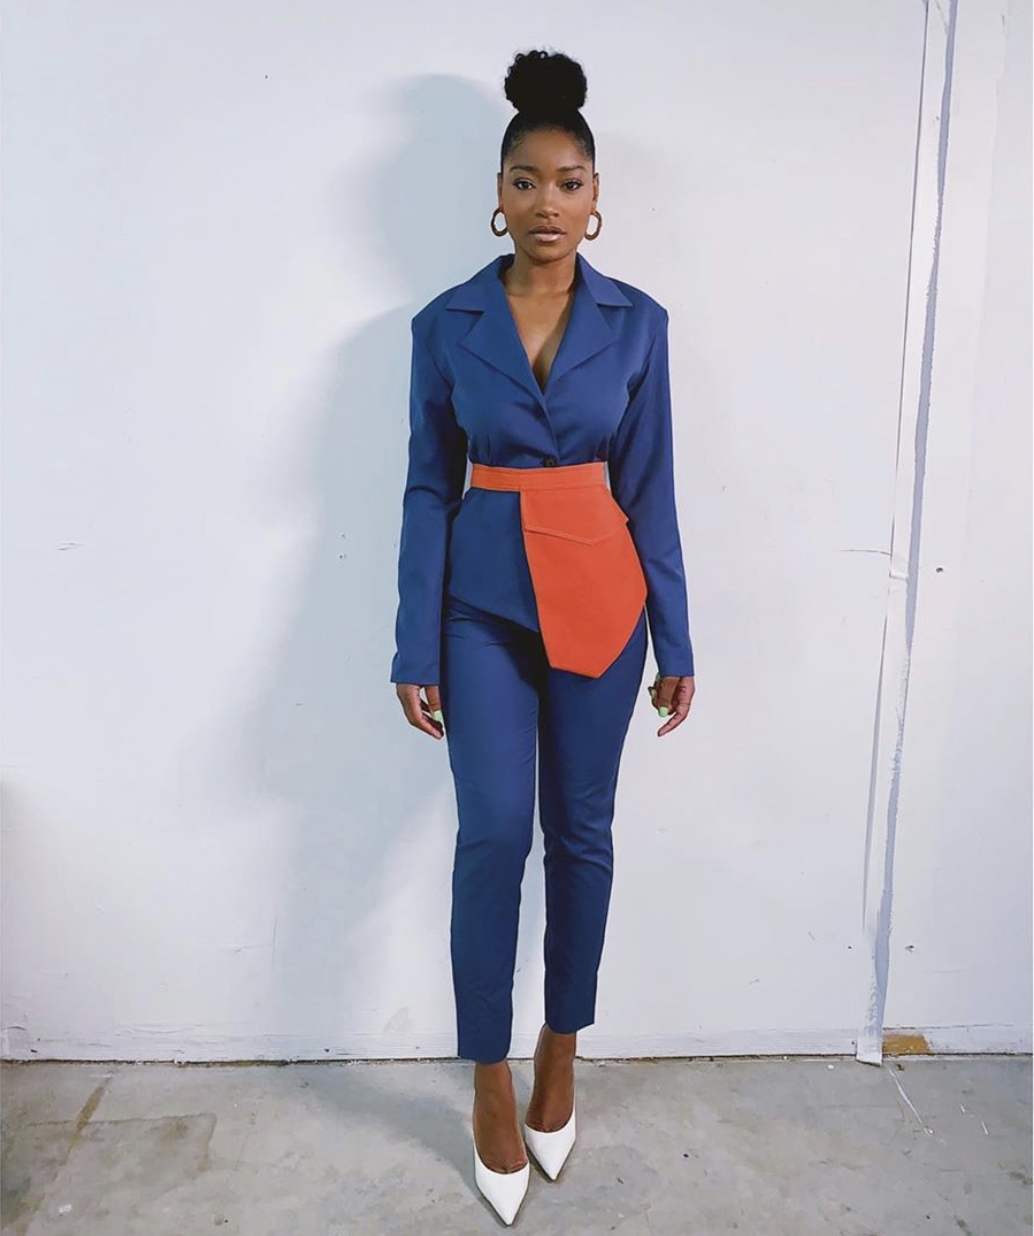 Keke Palmer Shows Us Why You Can Never Go Wrong with a Suit in a Lama ...